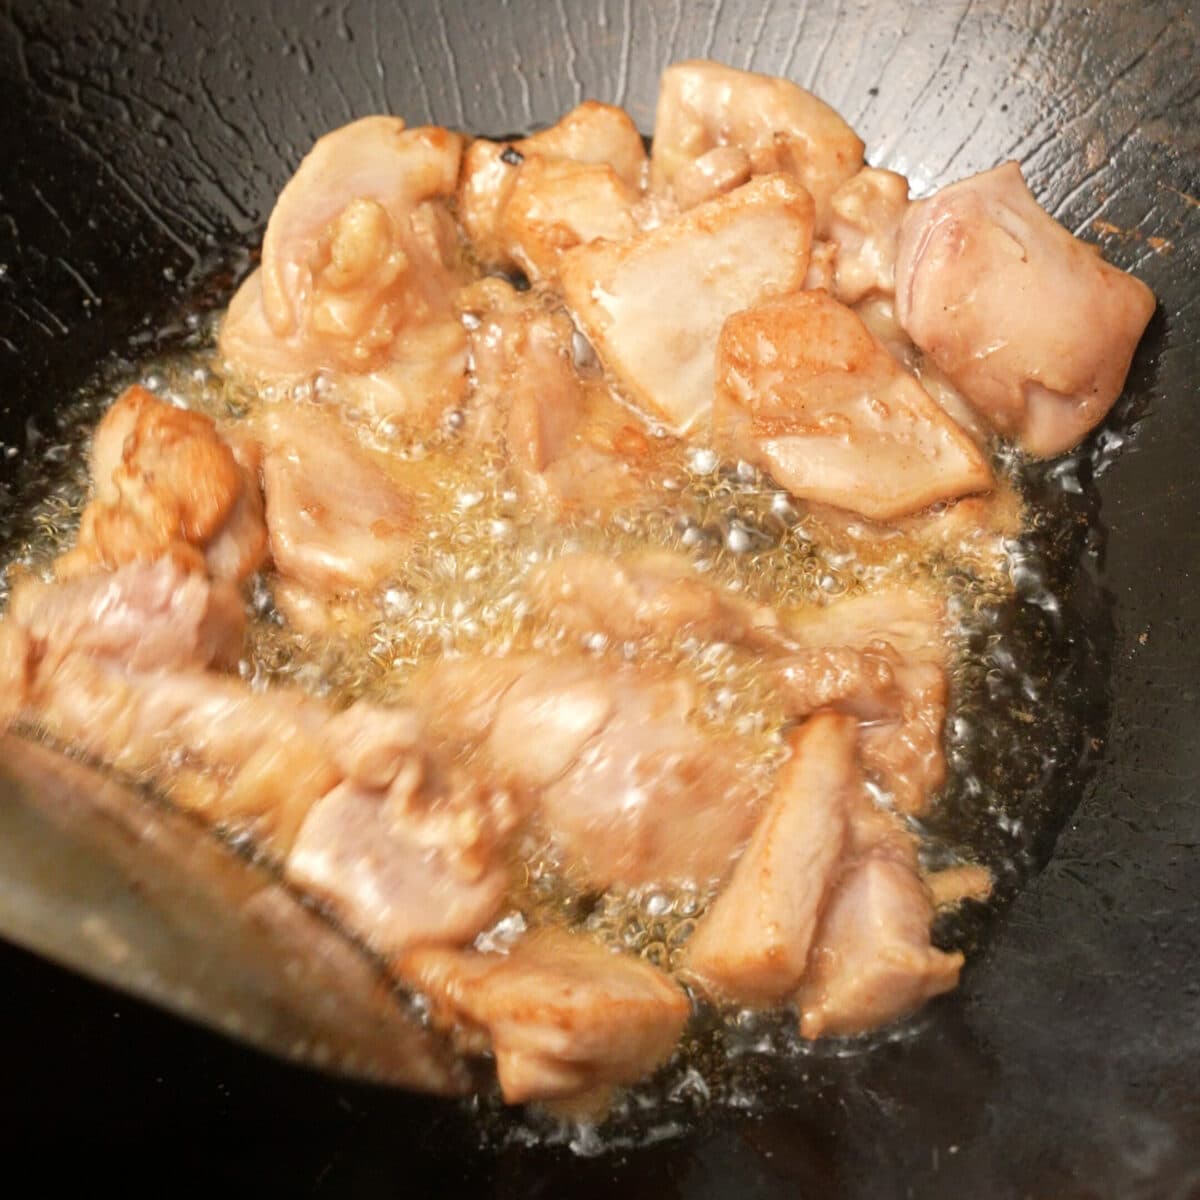 Chicken cooking in oil in a wok.